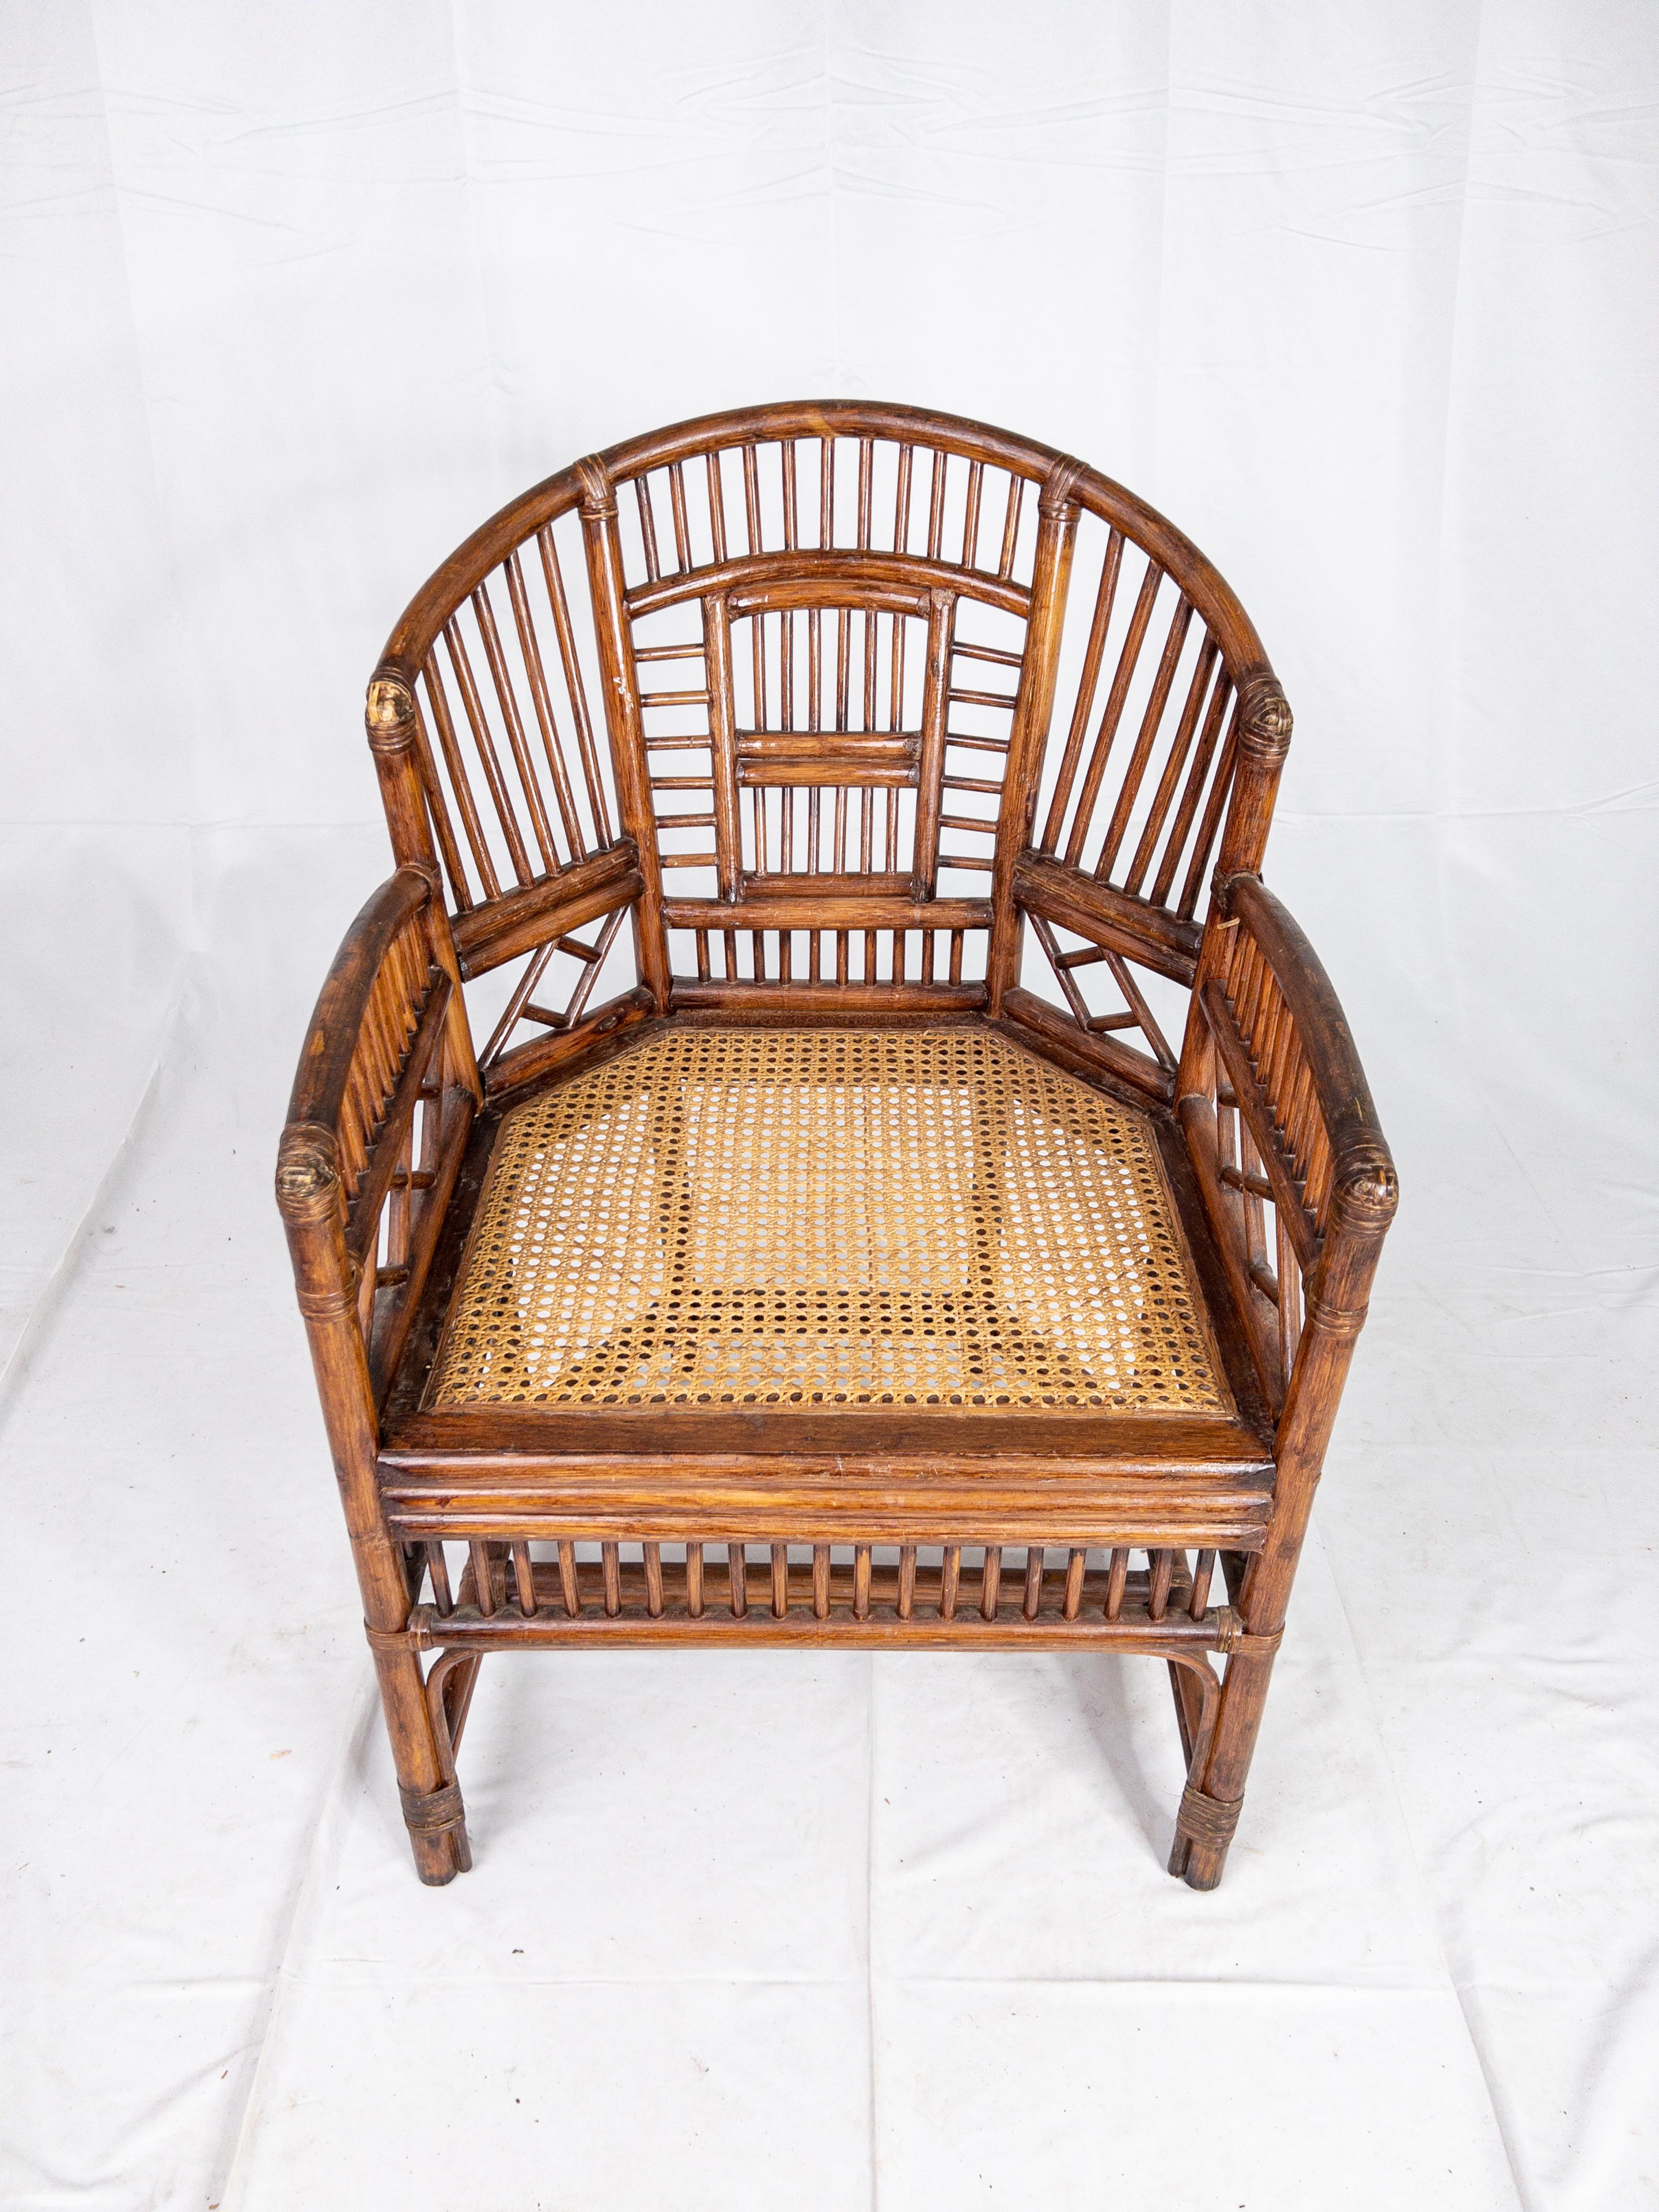 Vintage Brighton Scorched Bamboo Chippendale Chair with Rattan Seats. Quantity of 3. The finish color varies slightly on each chair. Please message us for specifics.